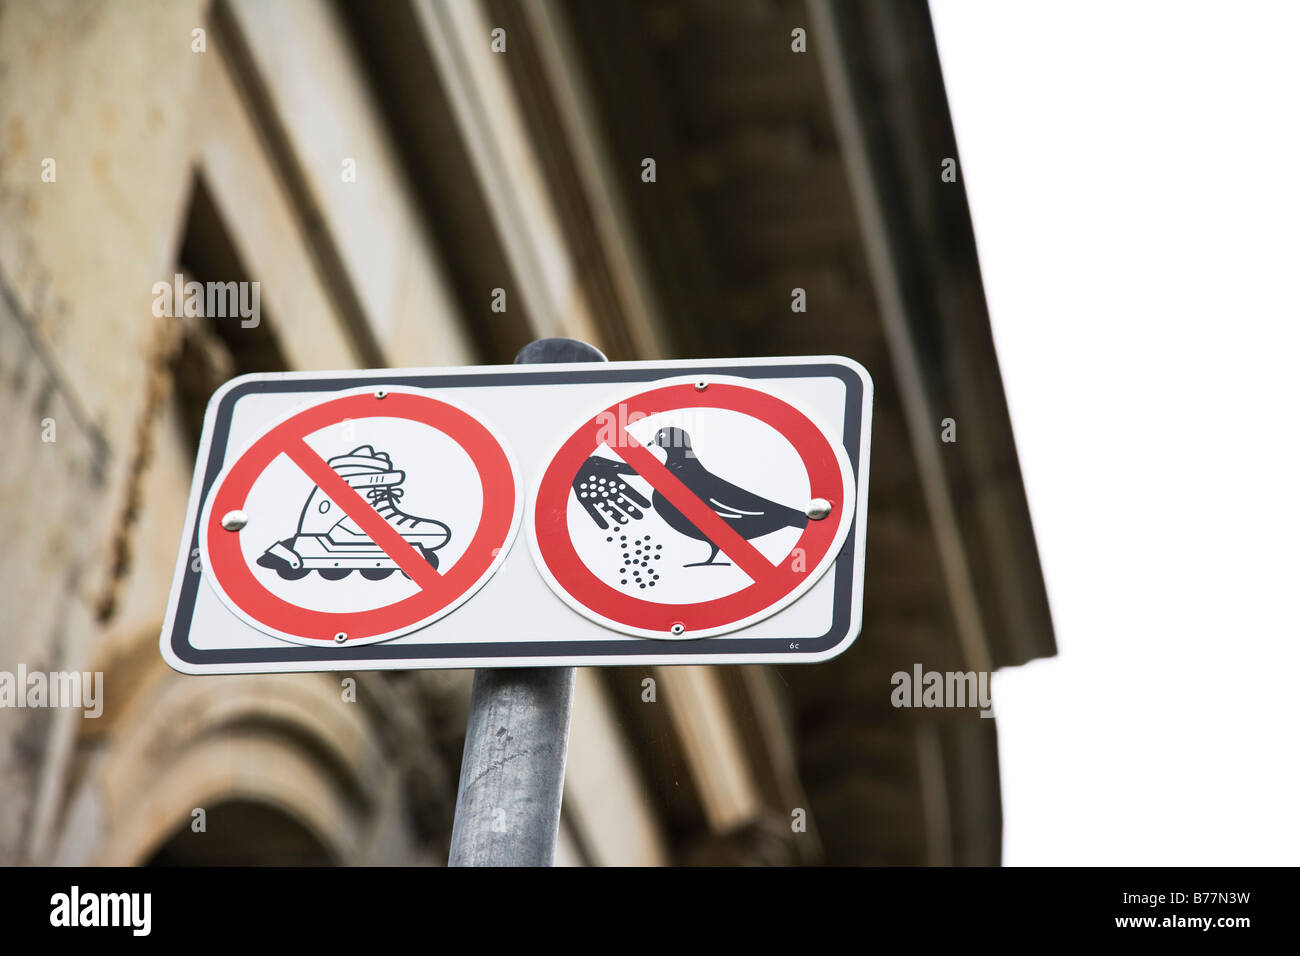 Prohibition signs, elevated view Stock Photo